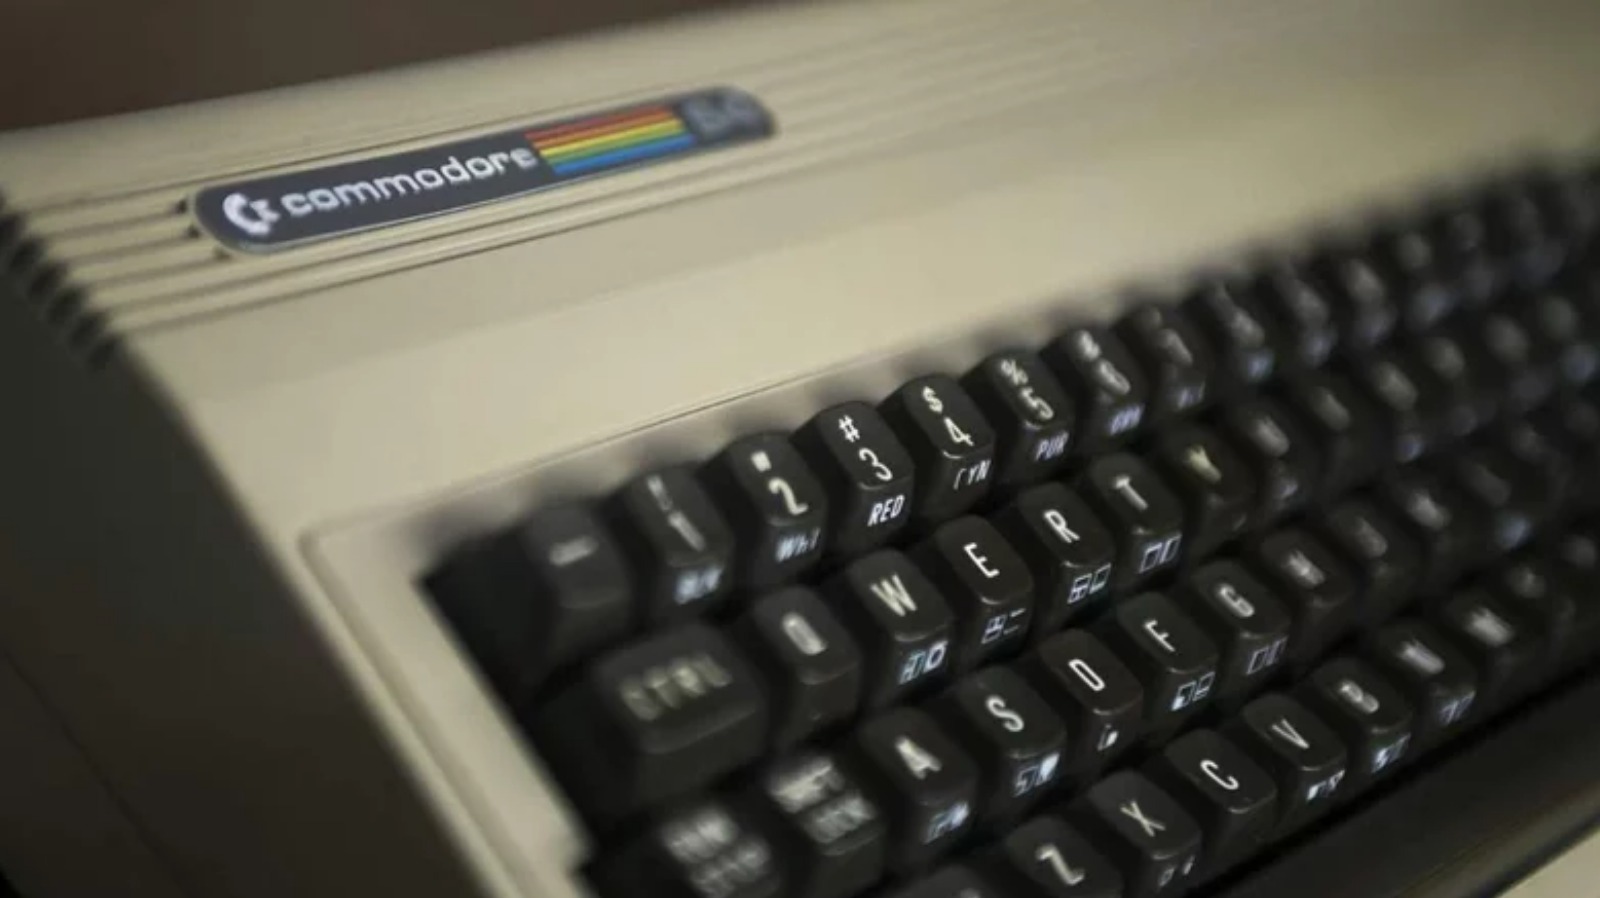 The Commodore 64 is the BEST Computer. Change my mind. 